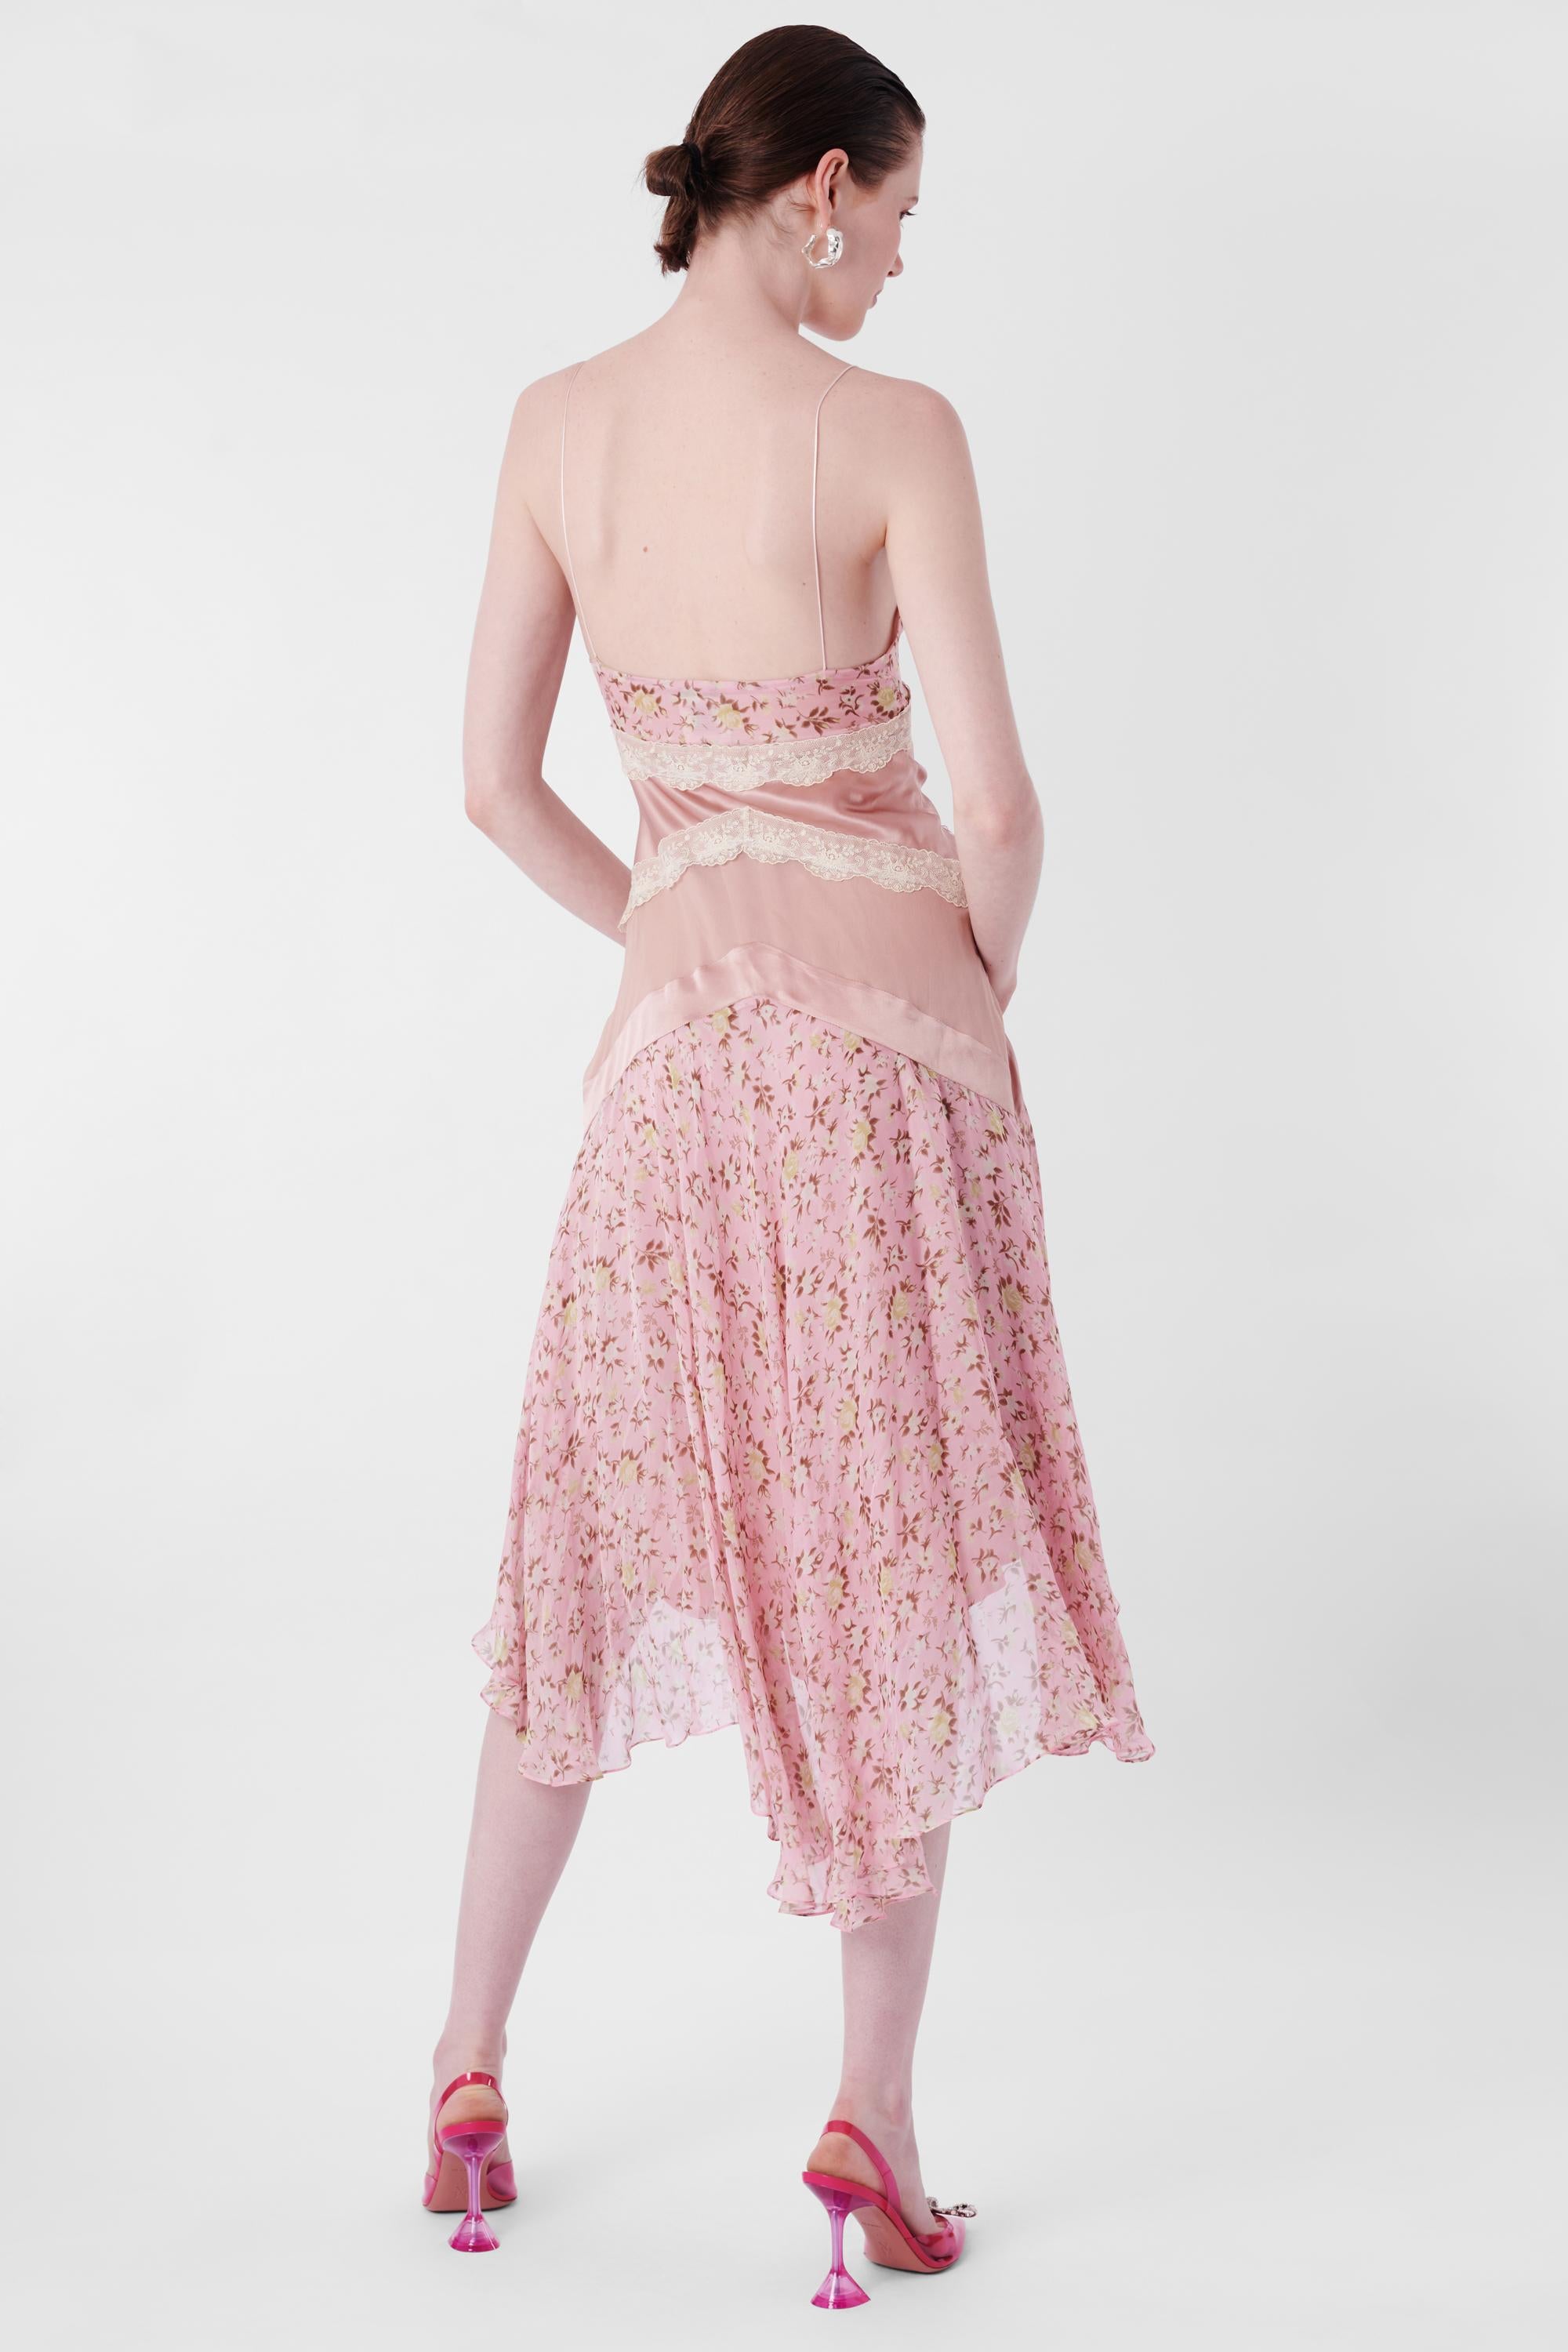 Dolce & Gabbana F/W 2004 Runway Floral Pink Silk Dress In Good Condition For Sale In London, GB